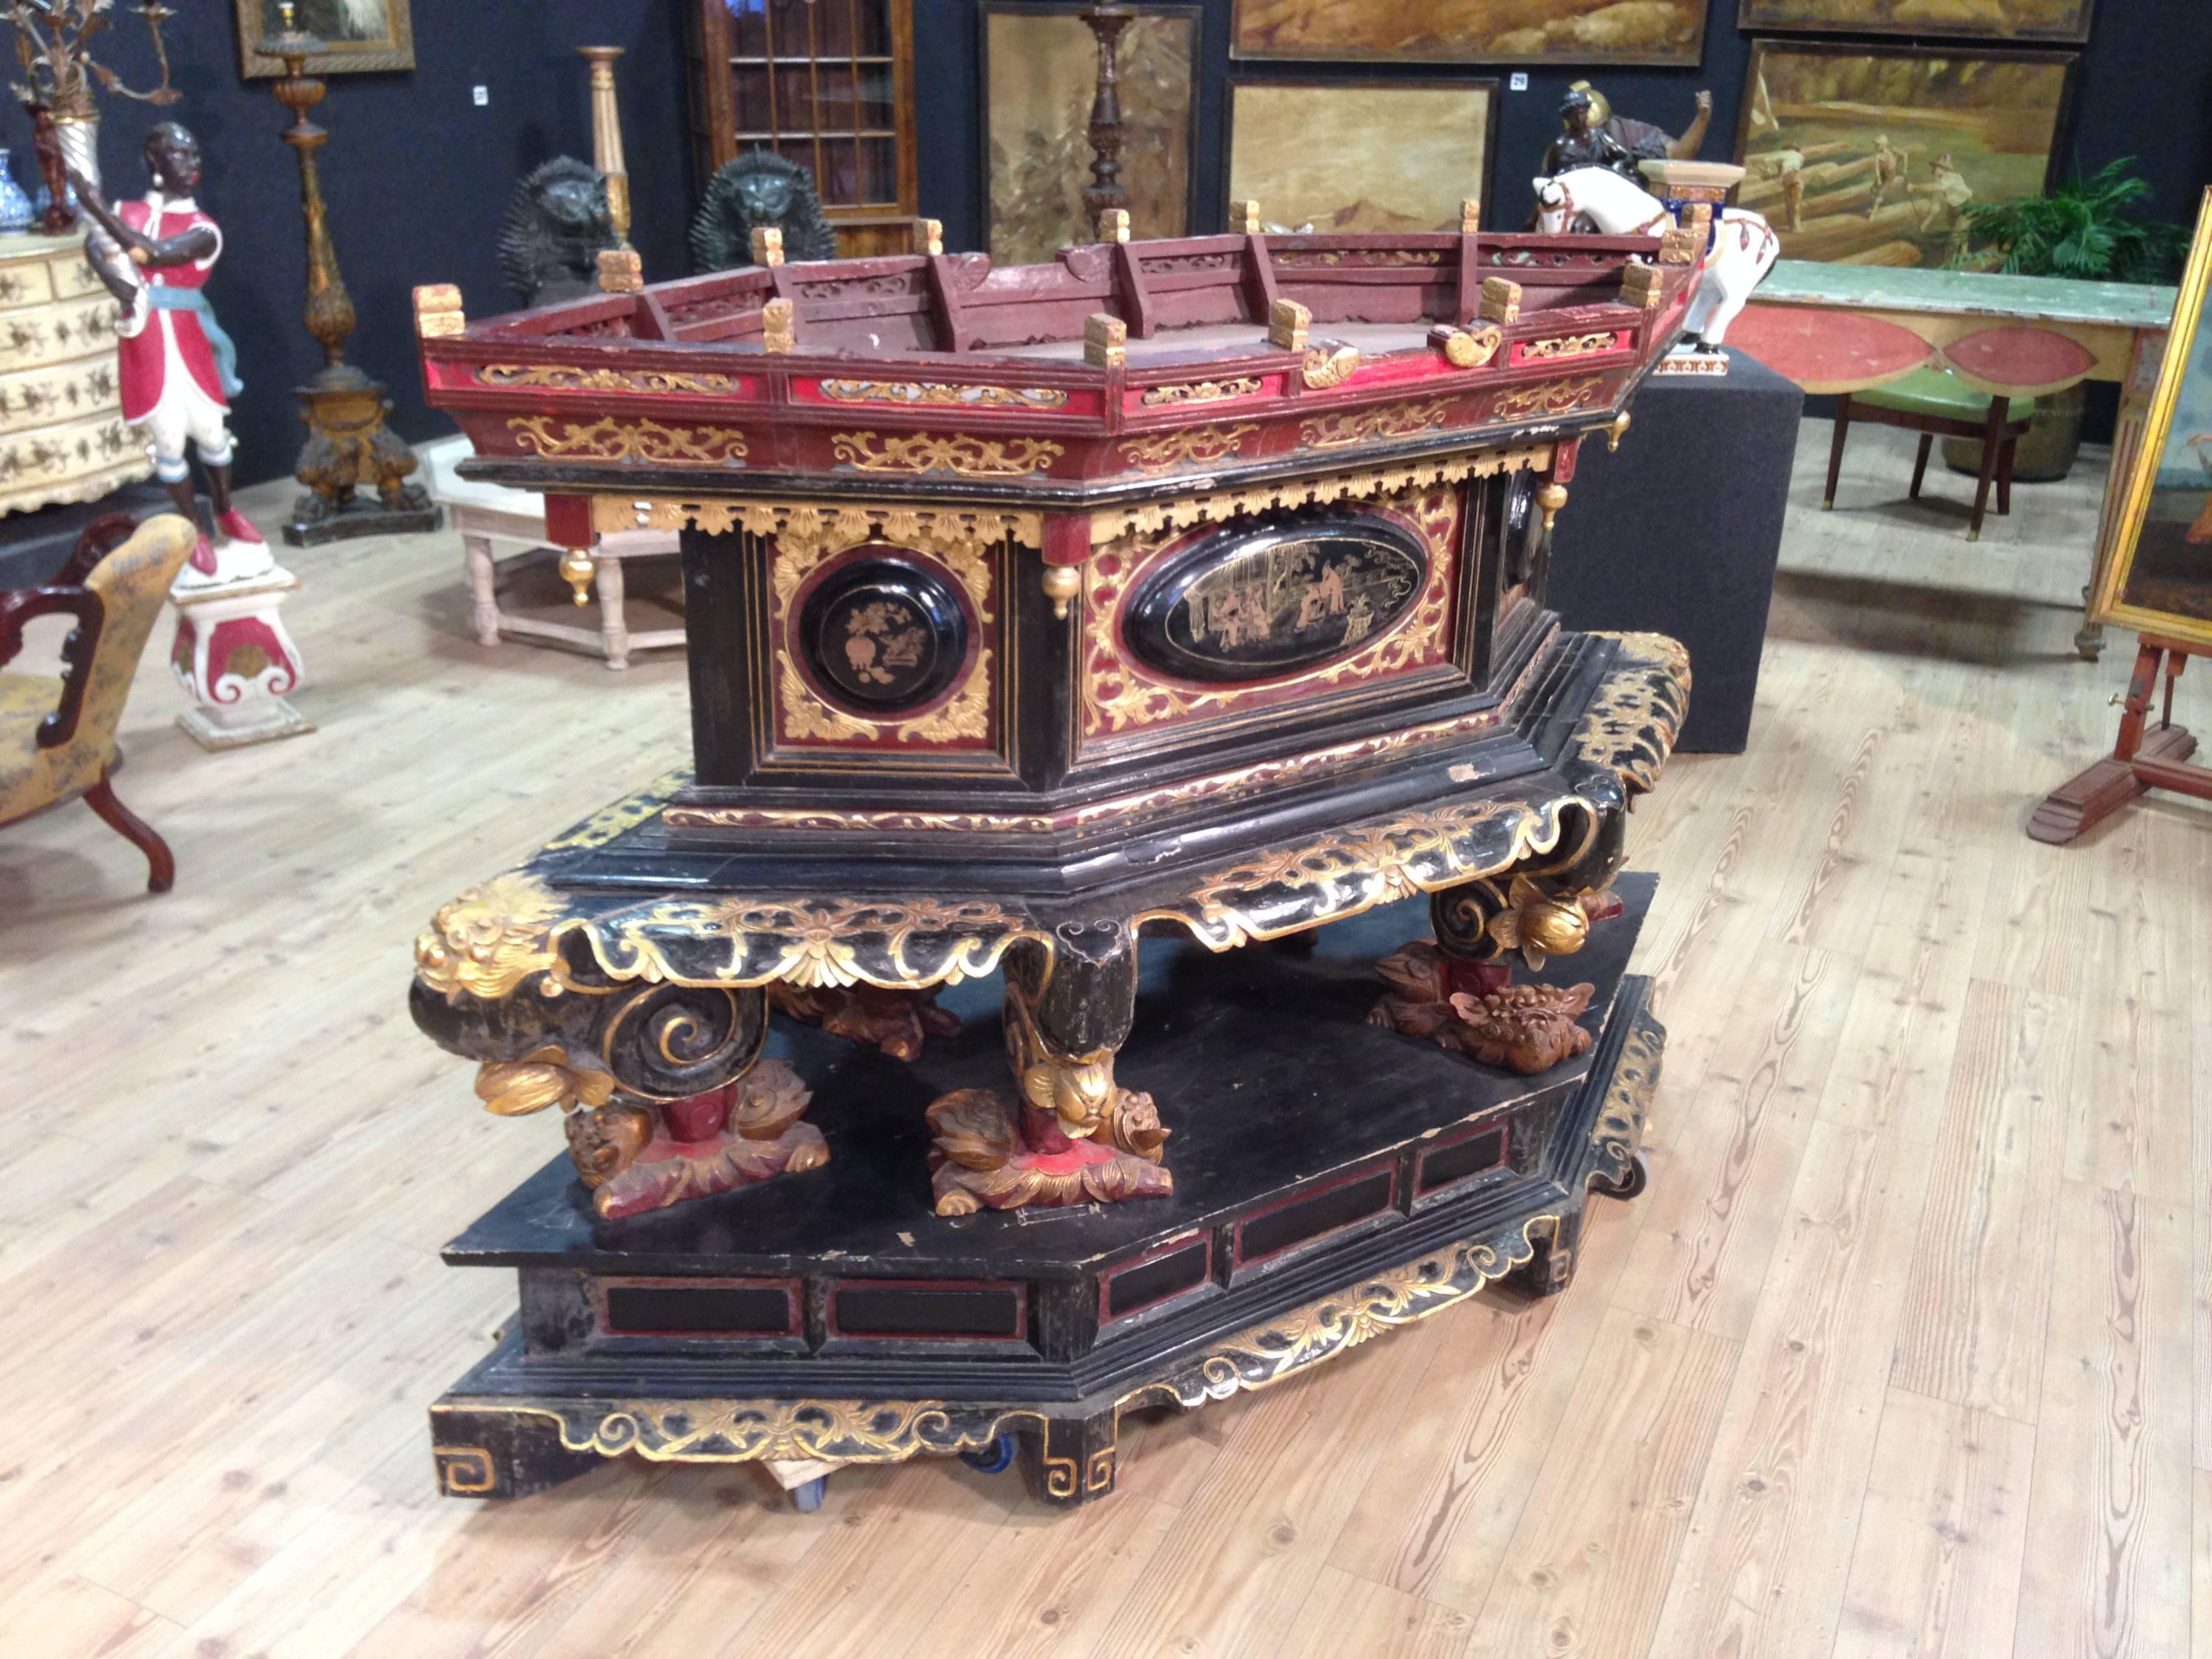 Rare Chinese living room furniture finished from the center from the mid-19th century. Imposing and elegant at the same time, finished with relief lacquered and painted panels with views with figures. Furniture built in two separable bodies (base